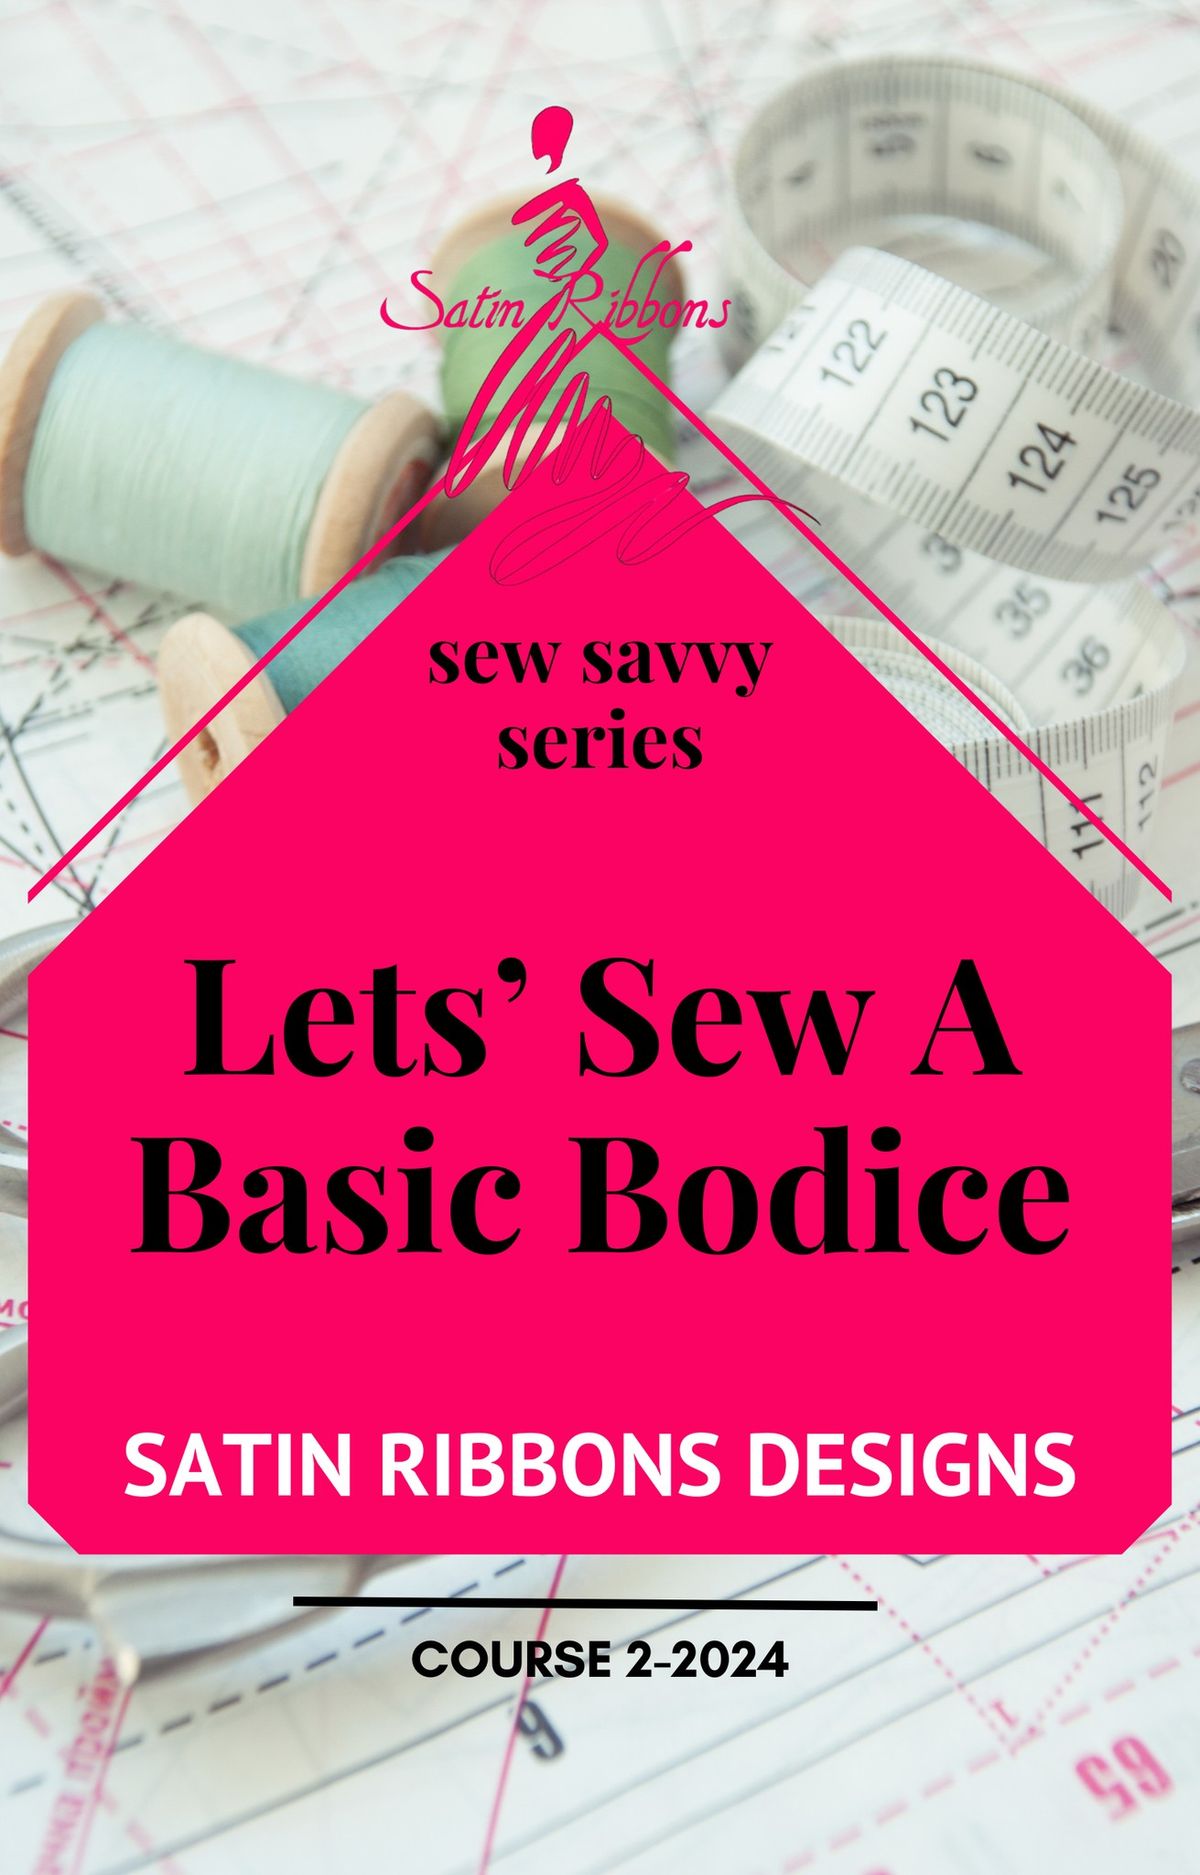 Sew Savvy Series: Course 2 - Let's Sew A Basic Bodice